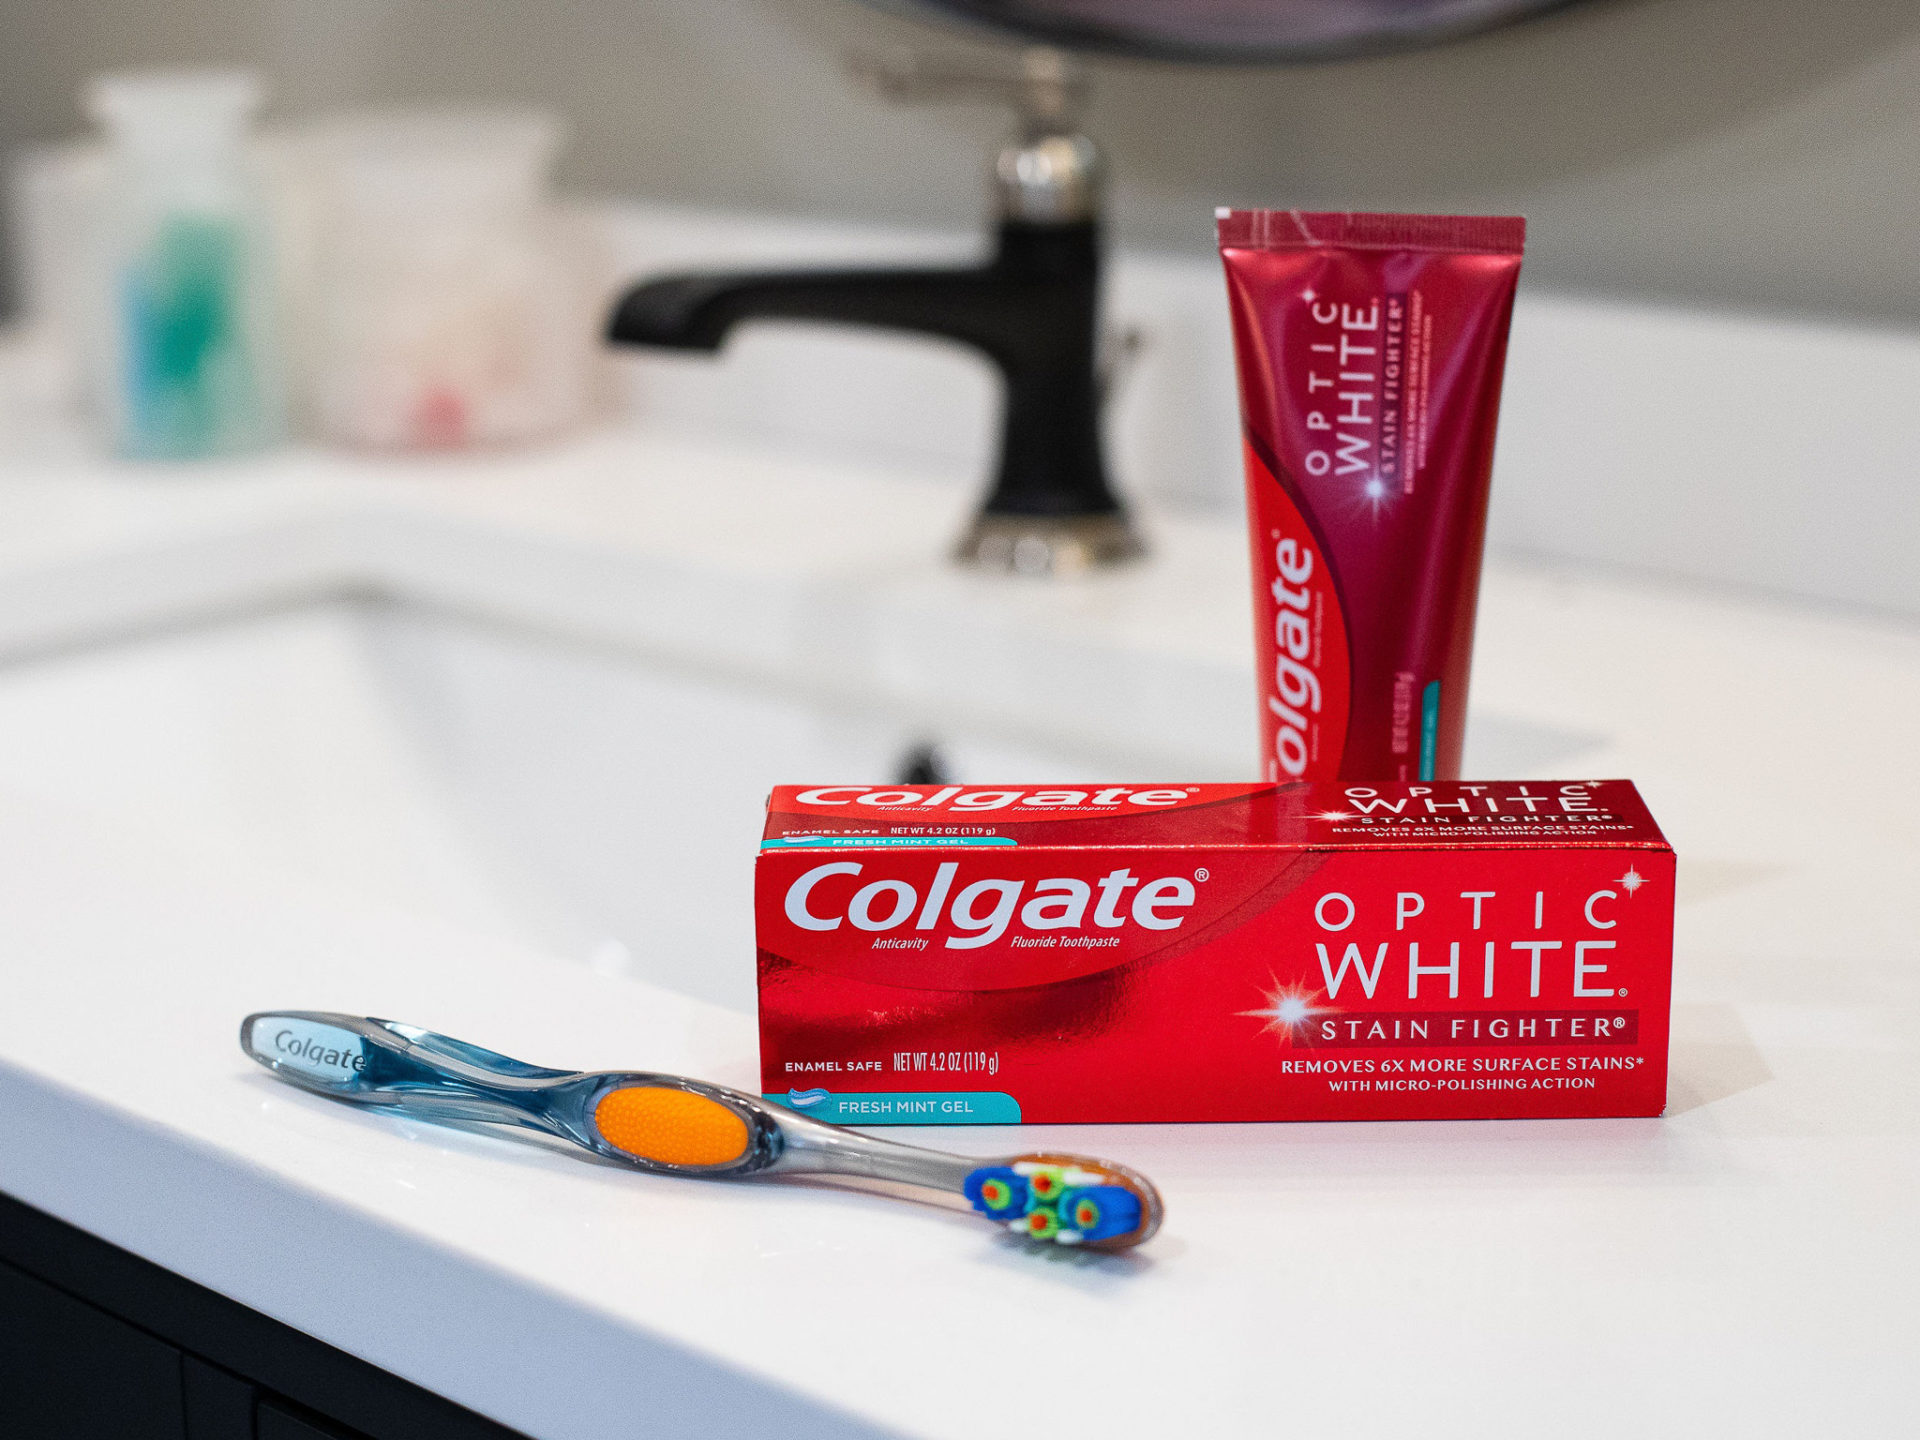 Colgate Optic White Toothpaste Just $1.99 At Kroger